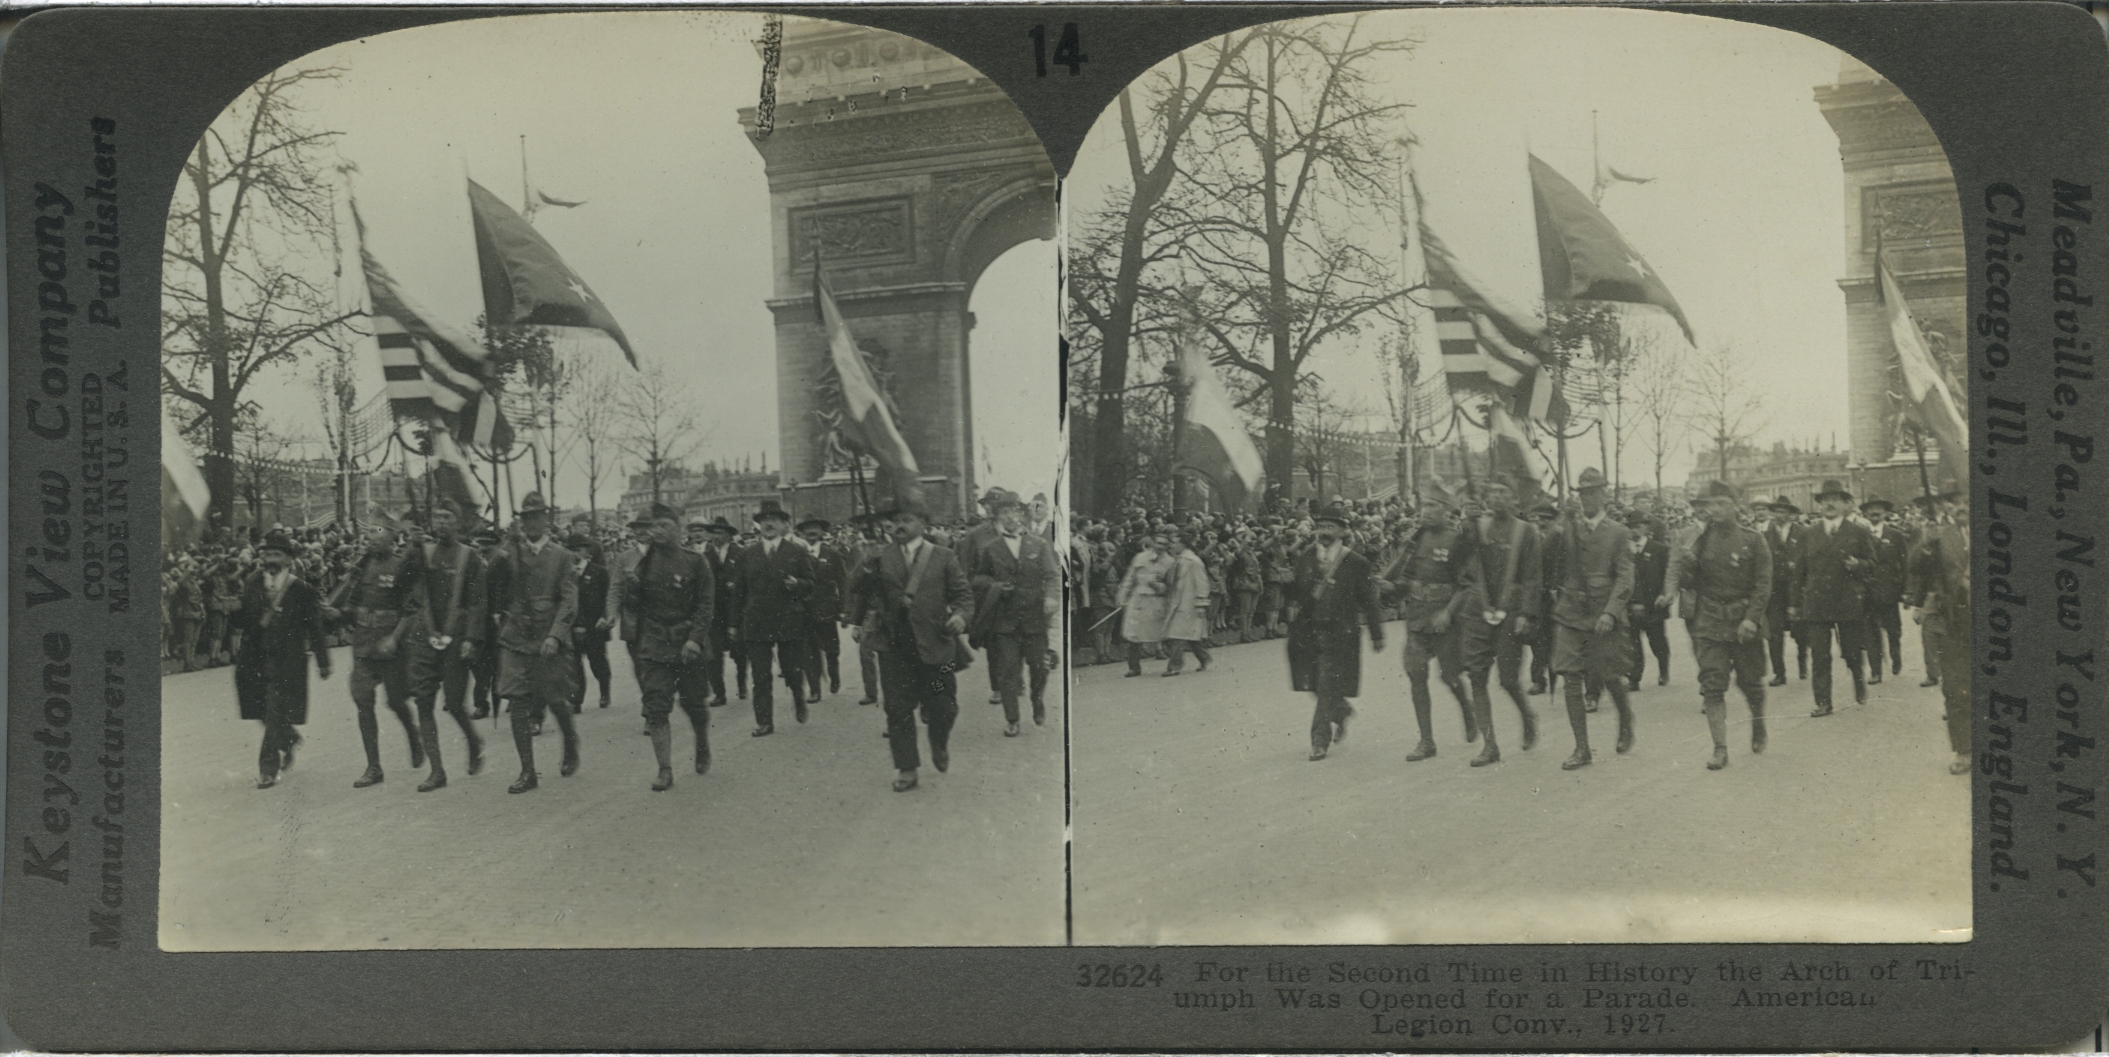 For the Second Time in History the Arch of Triumph Was Opened for a Parade. American Legion Conv., 1927